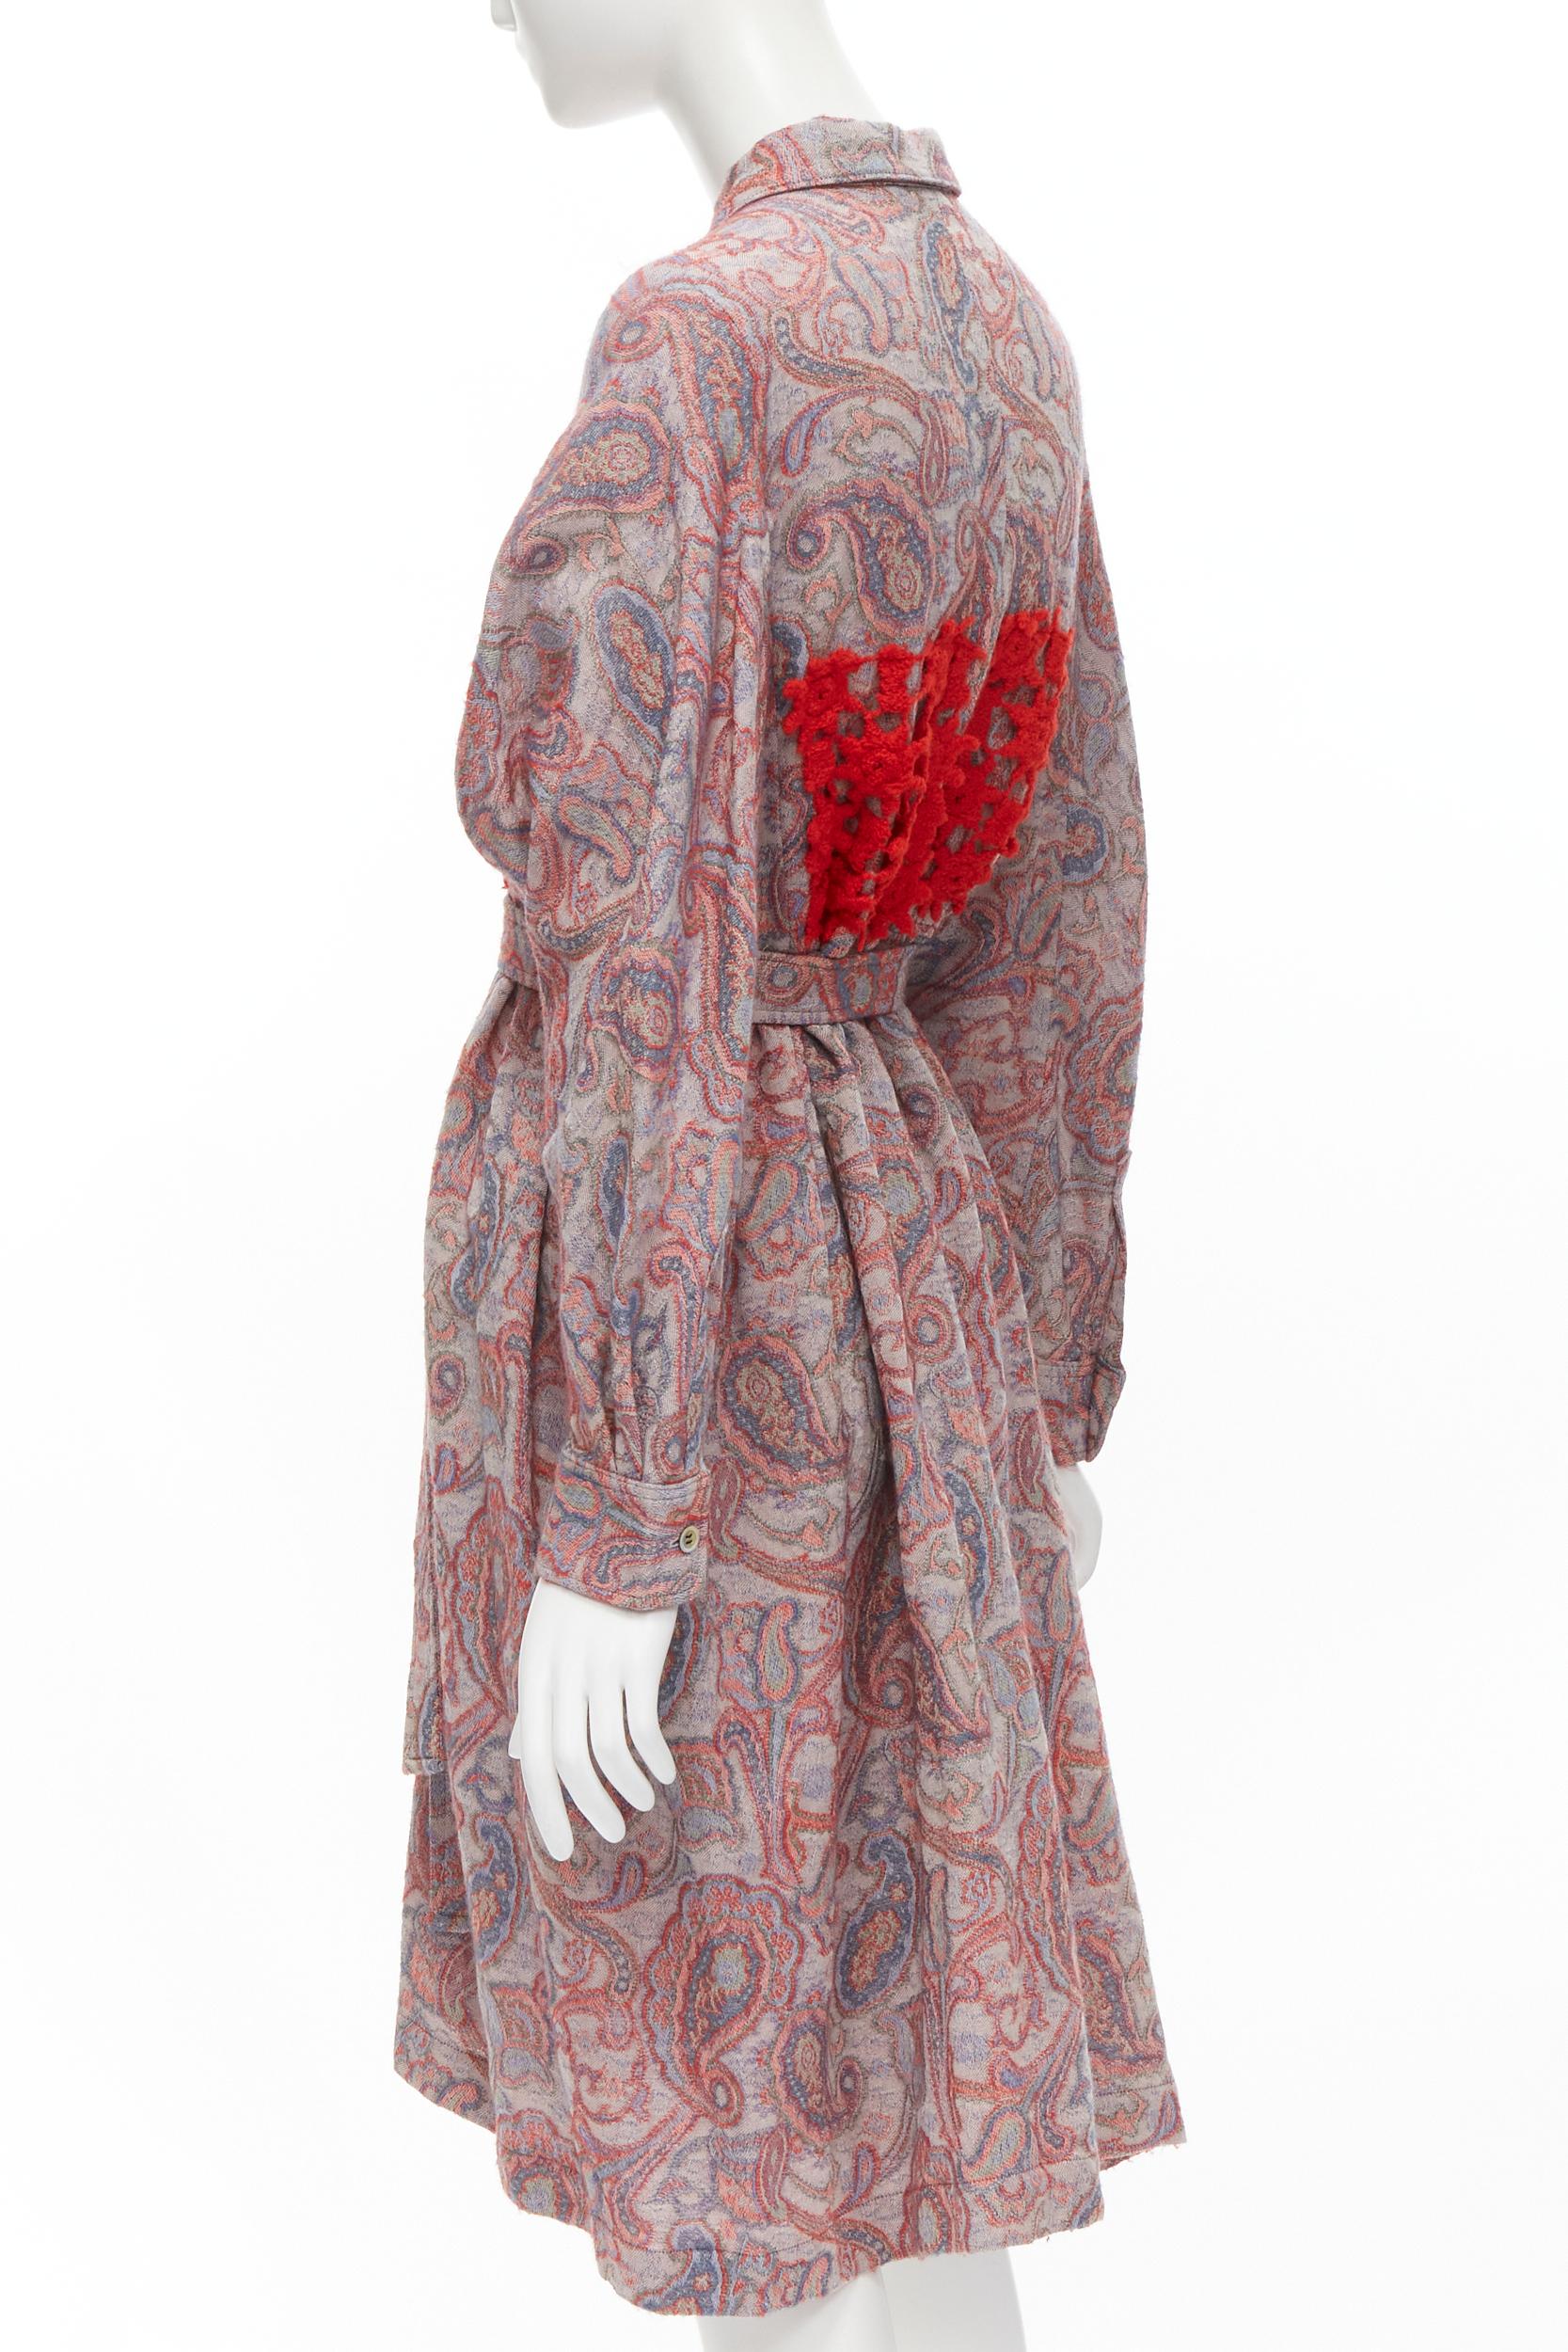 Women's vintage COMME DES GARCONS 1988 red paisley embroidered belted moumou dress M